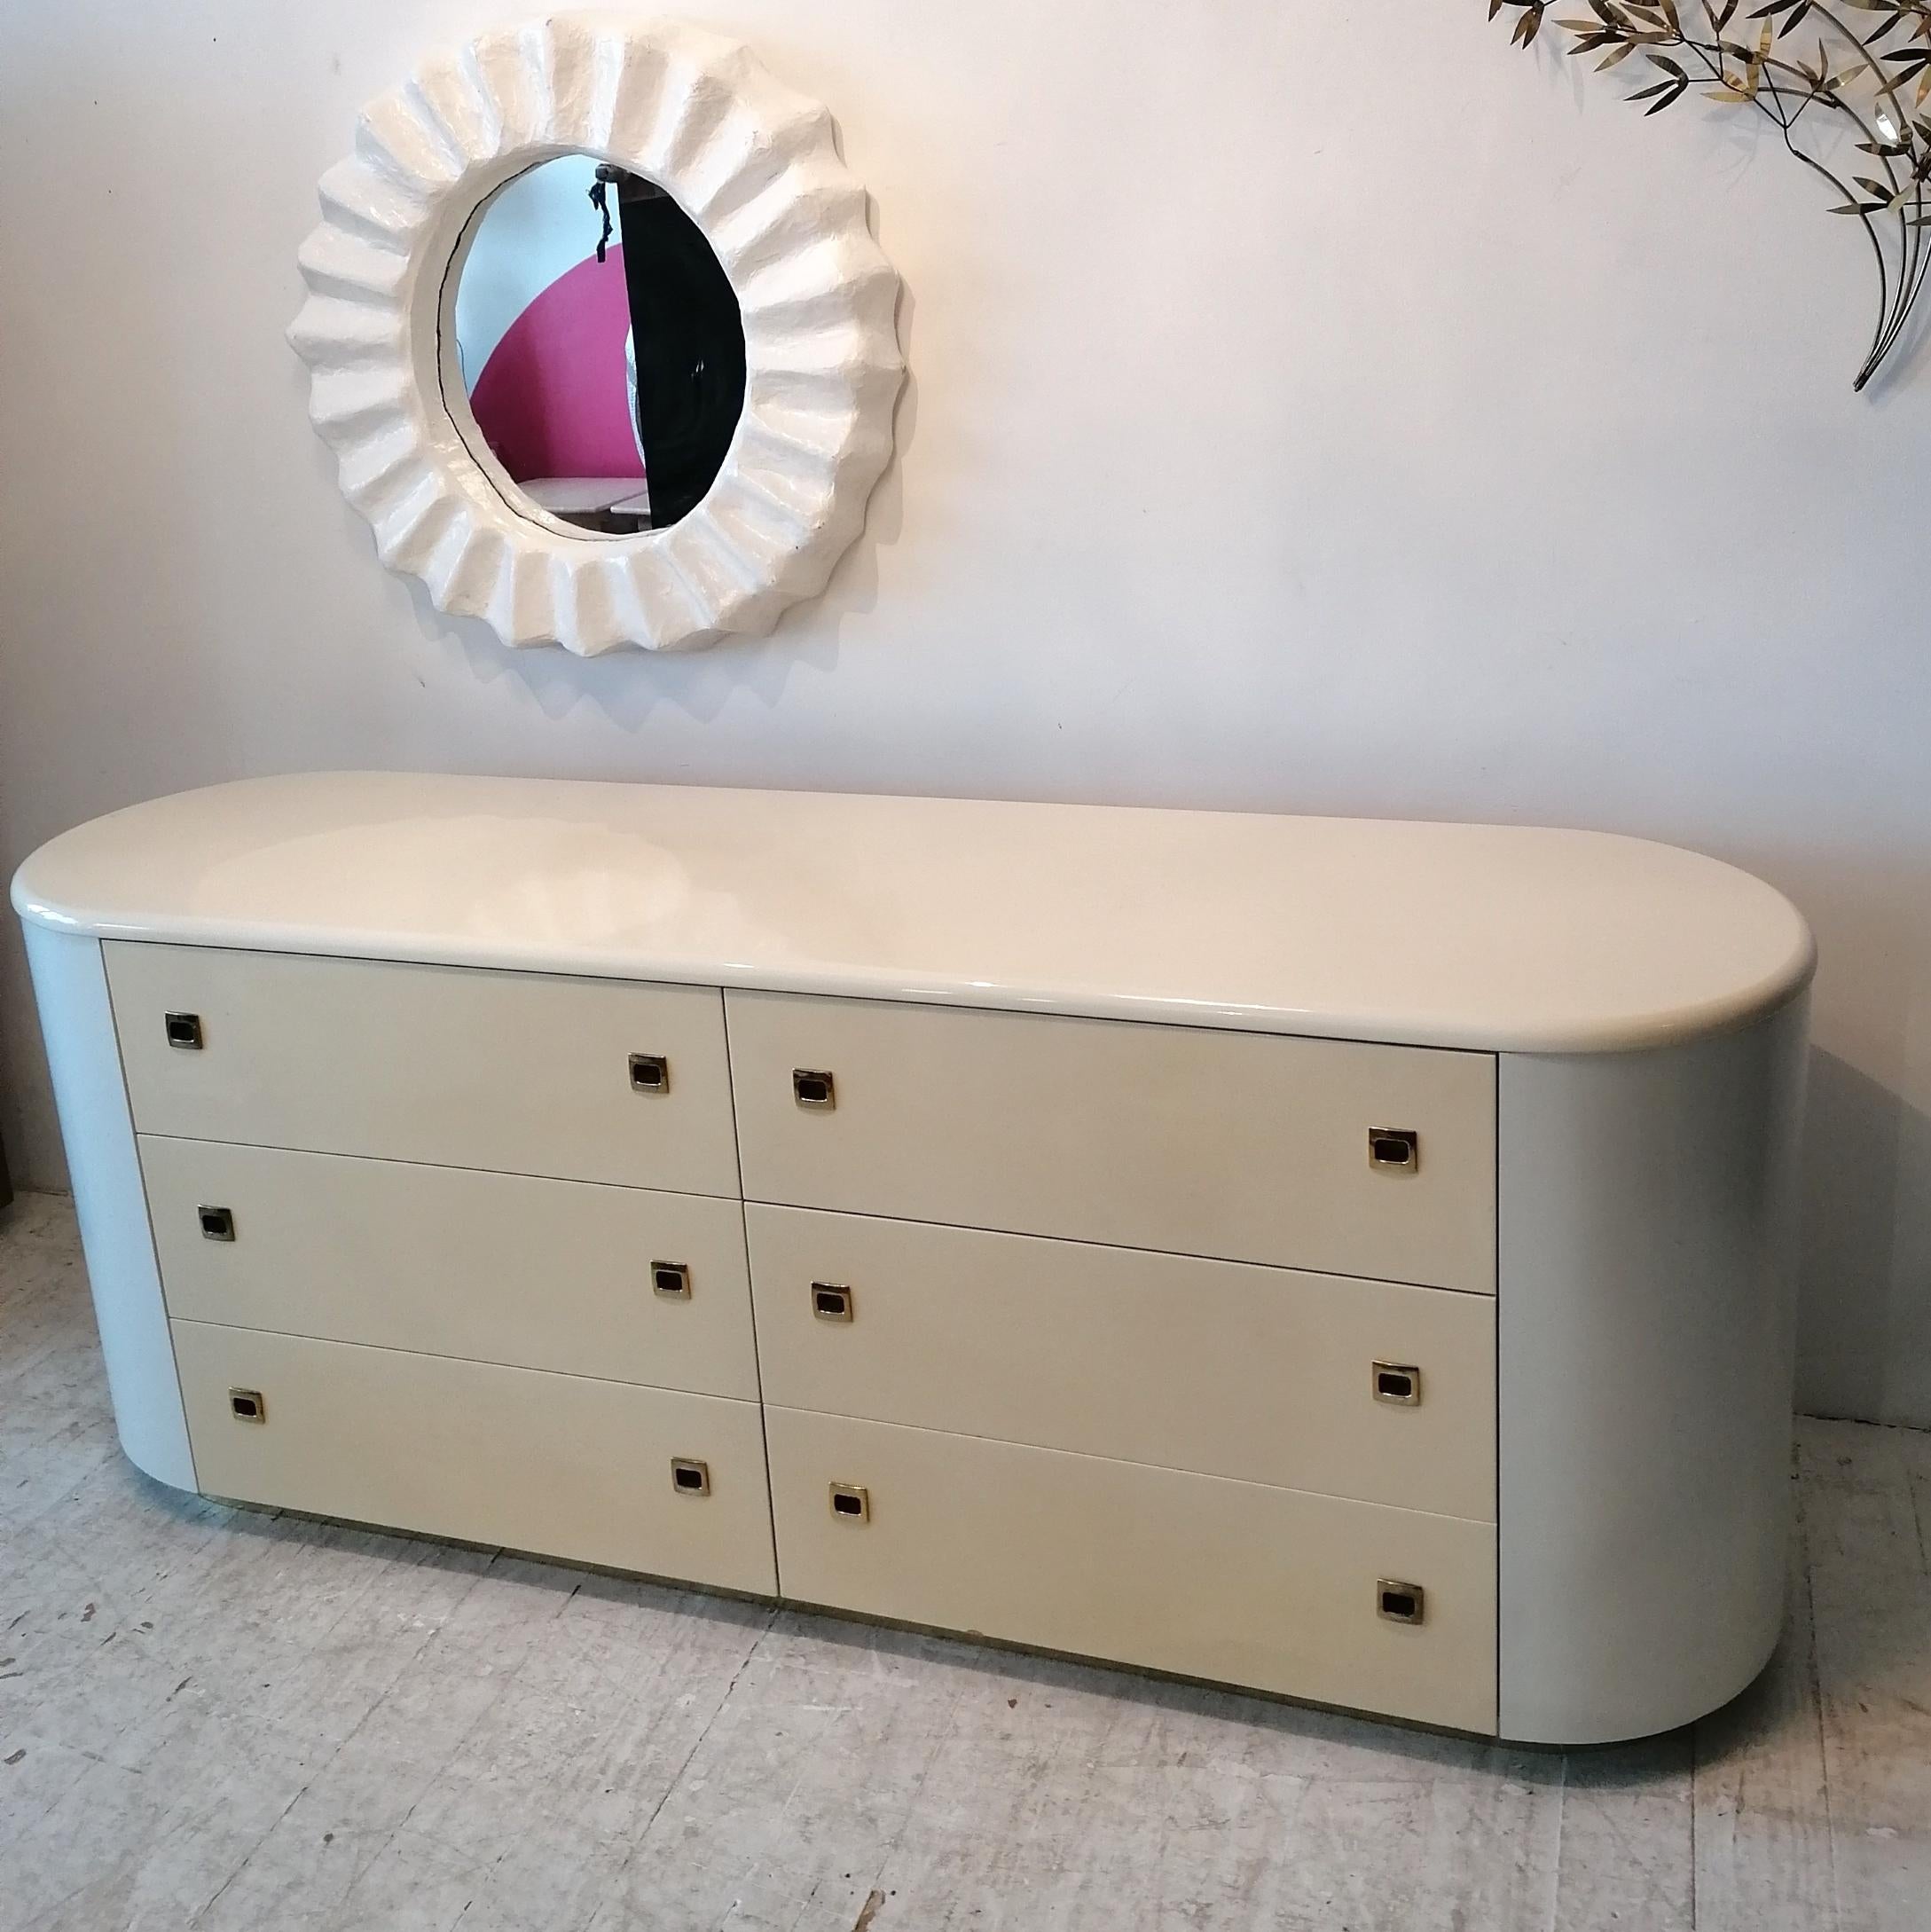 Gorgeous pill-shaped Deco Revival sideboard or dresser with six large drawers, 1980s American. 
Drawer fronts are shiny cream lacquer, the rest of the piece is off-white, with a soft sheen. Drawer handles are gold metal and the plinth is also gold